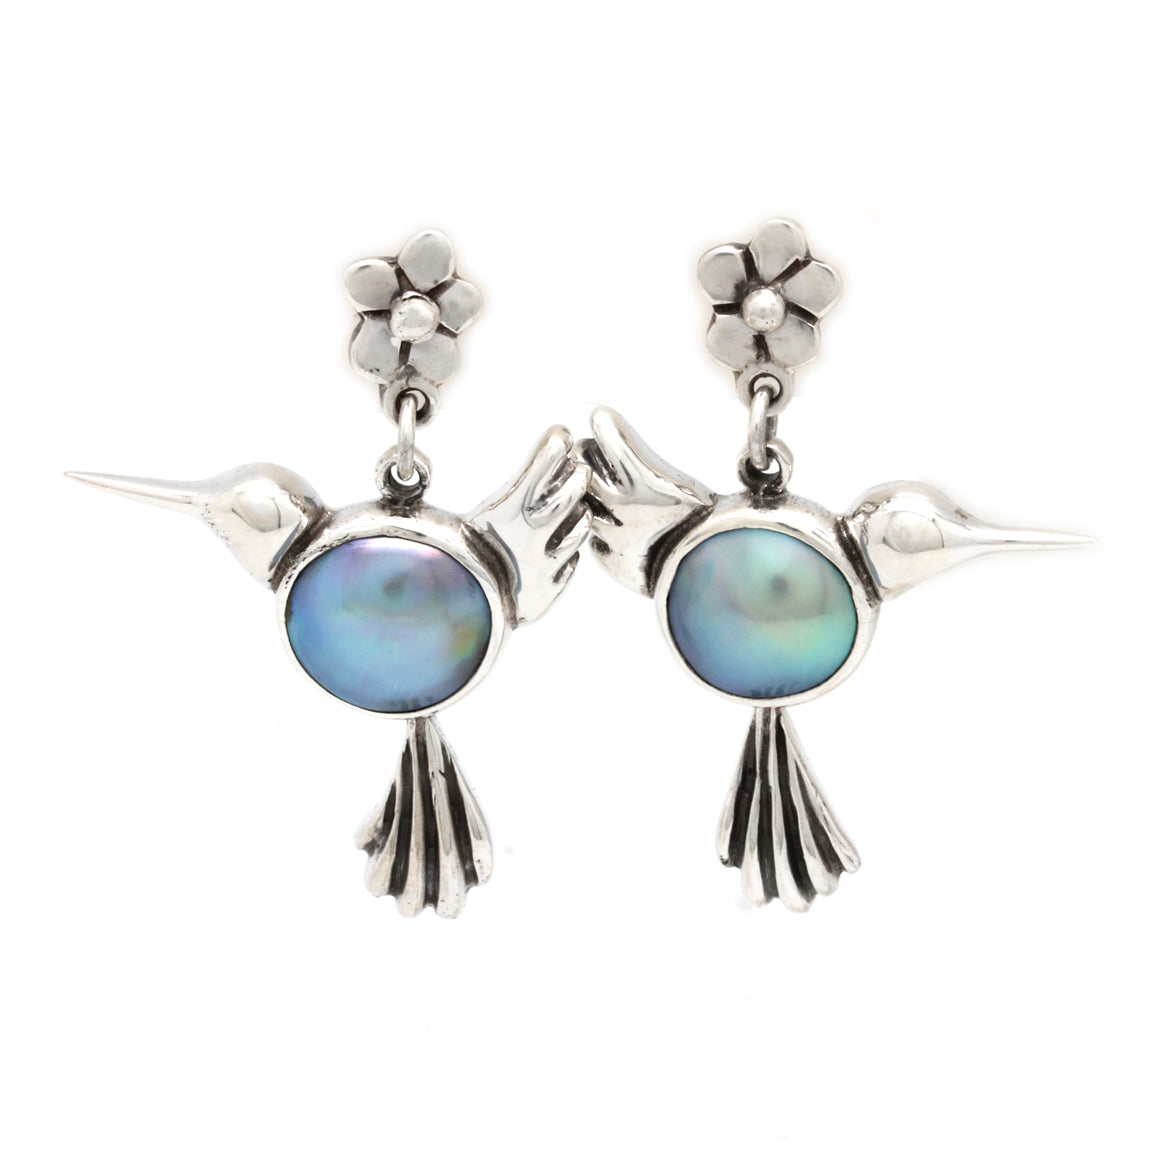 "Hummingbird" Silver Earrings with Cortez Mabe Pearls by Priscila Canales